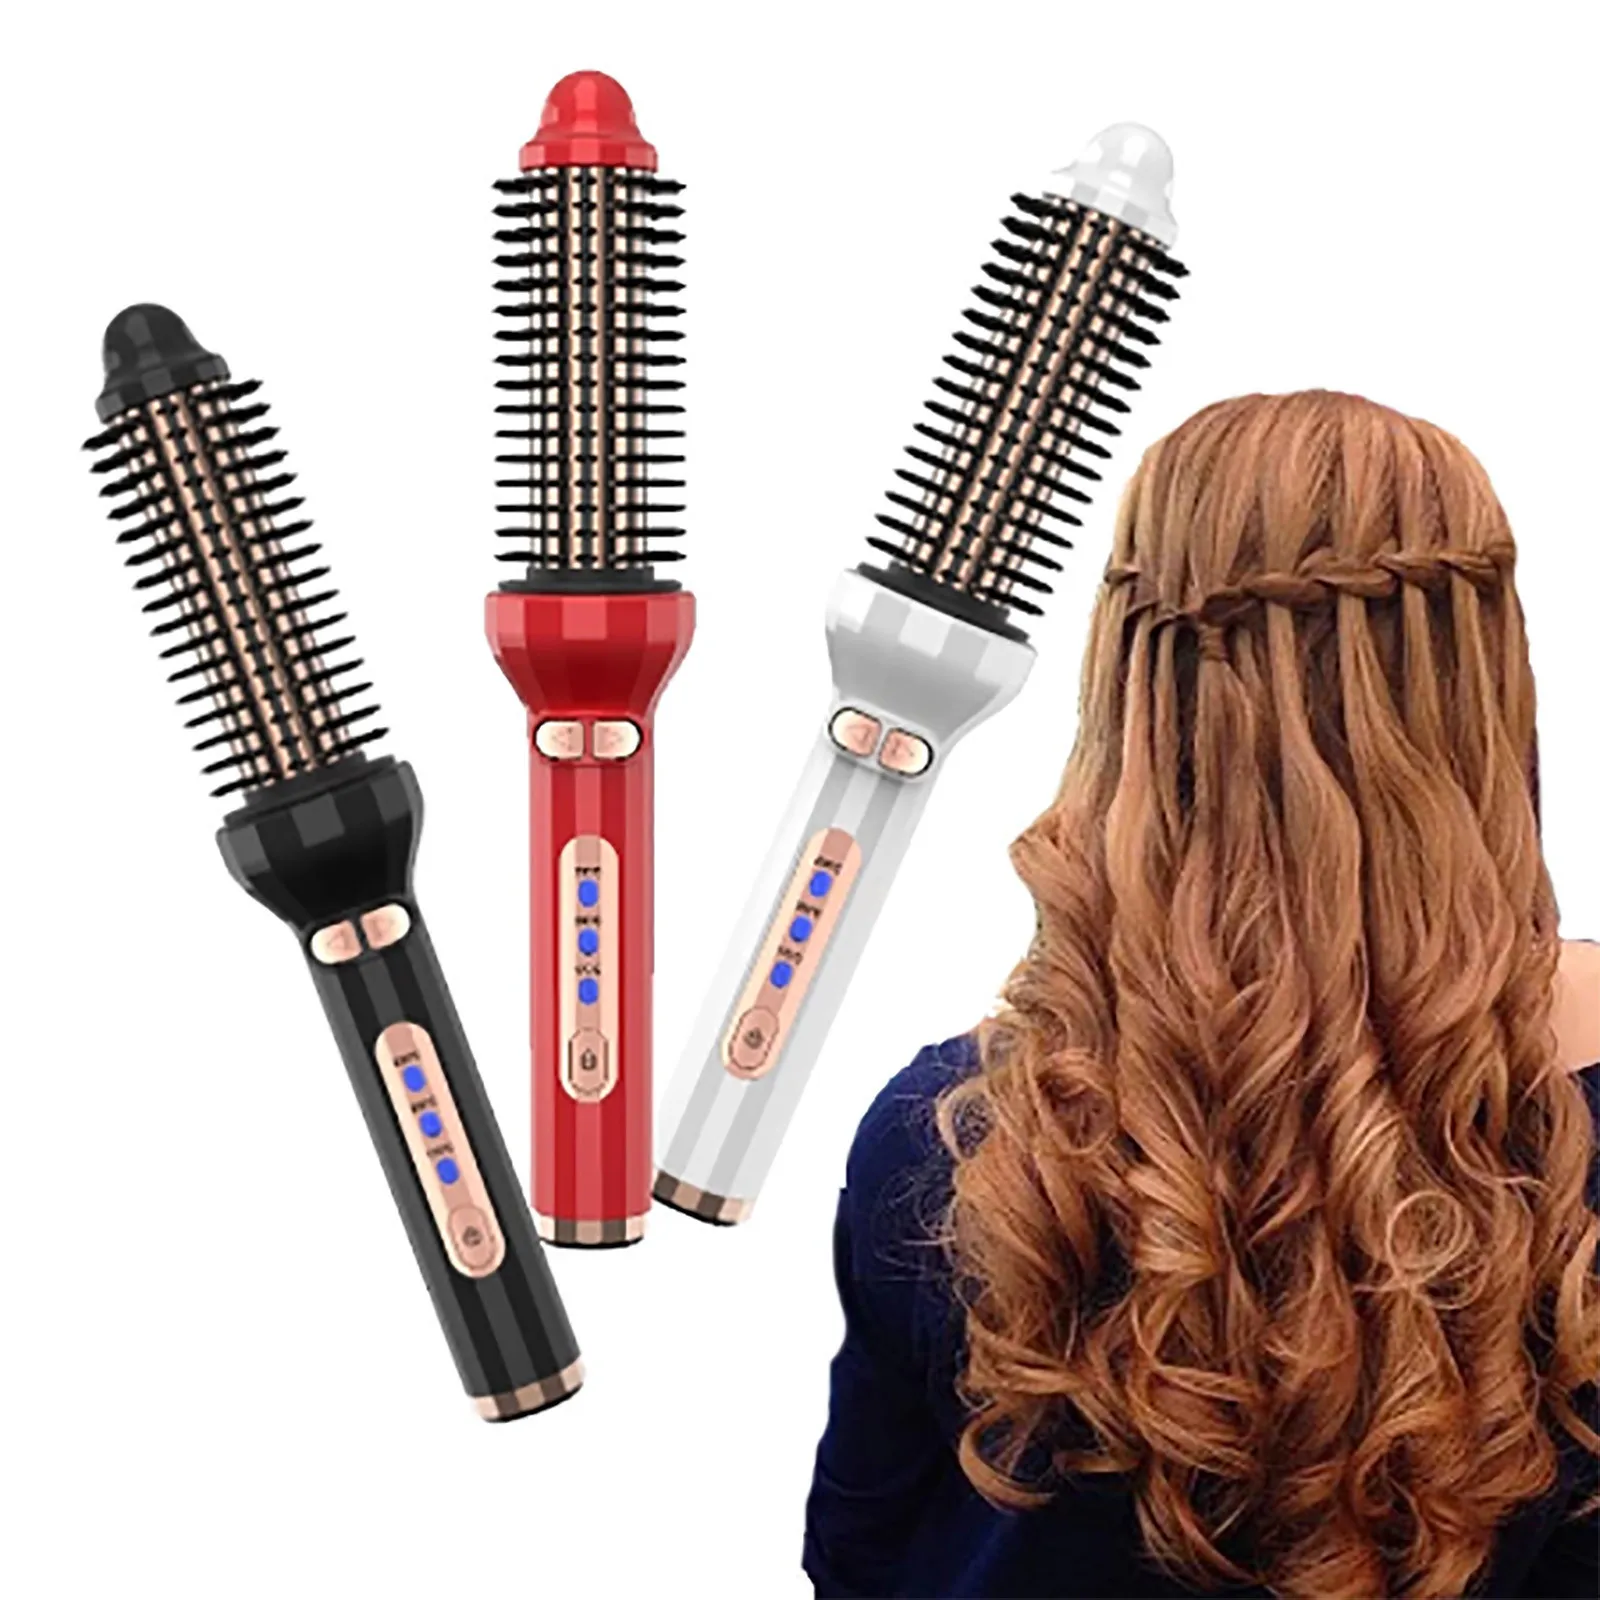 

Automatic Hair Dryer Roller Hair Curling Iron Electric Hair Curler Auto Rotating Hot Air Brush For Blow Dry Waves Curls Comb#db4